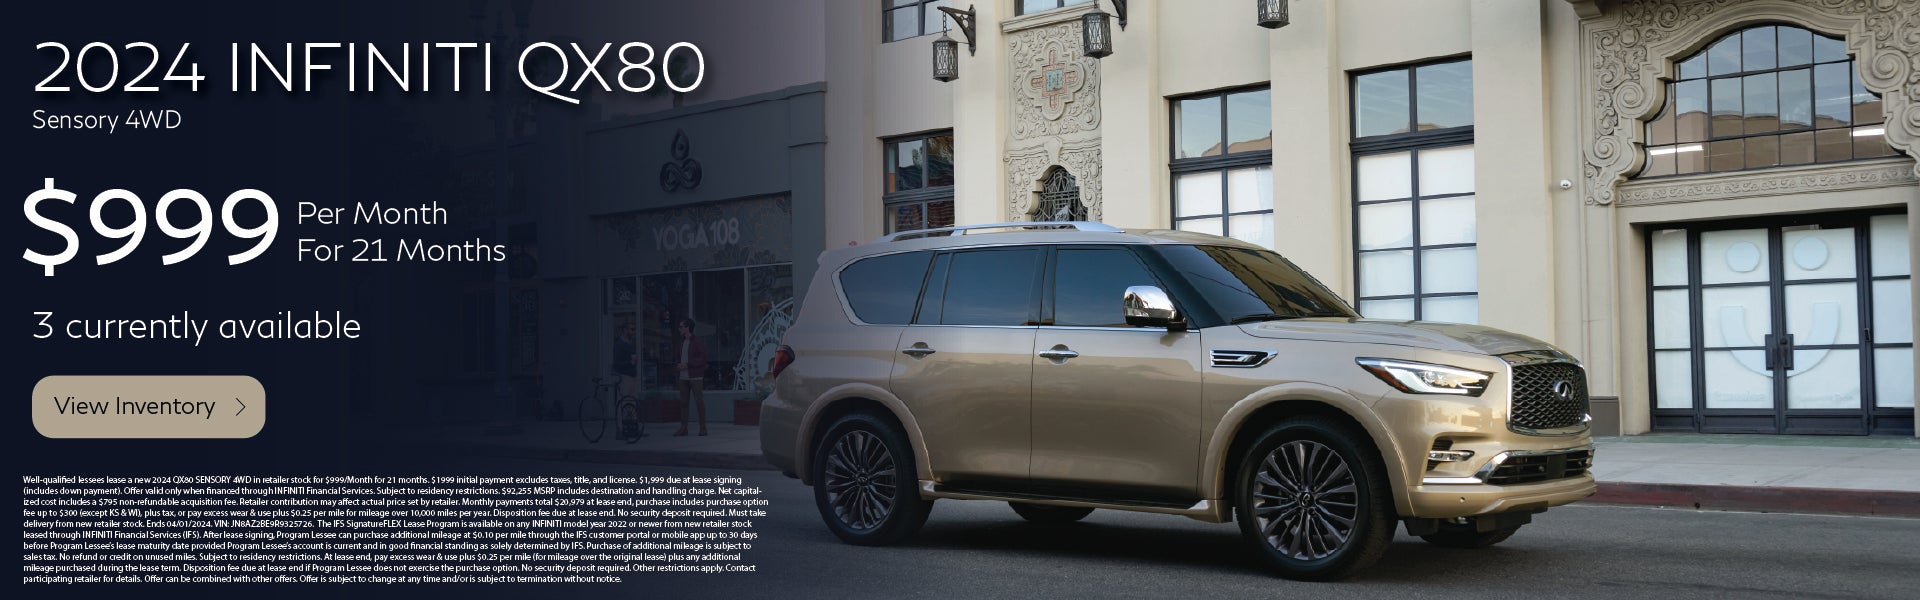 INFINITI of Northern Kentucky QX80 Lease Offer